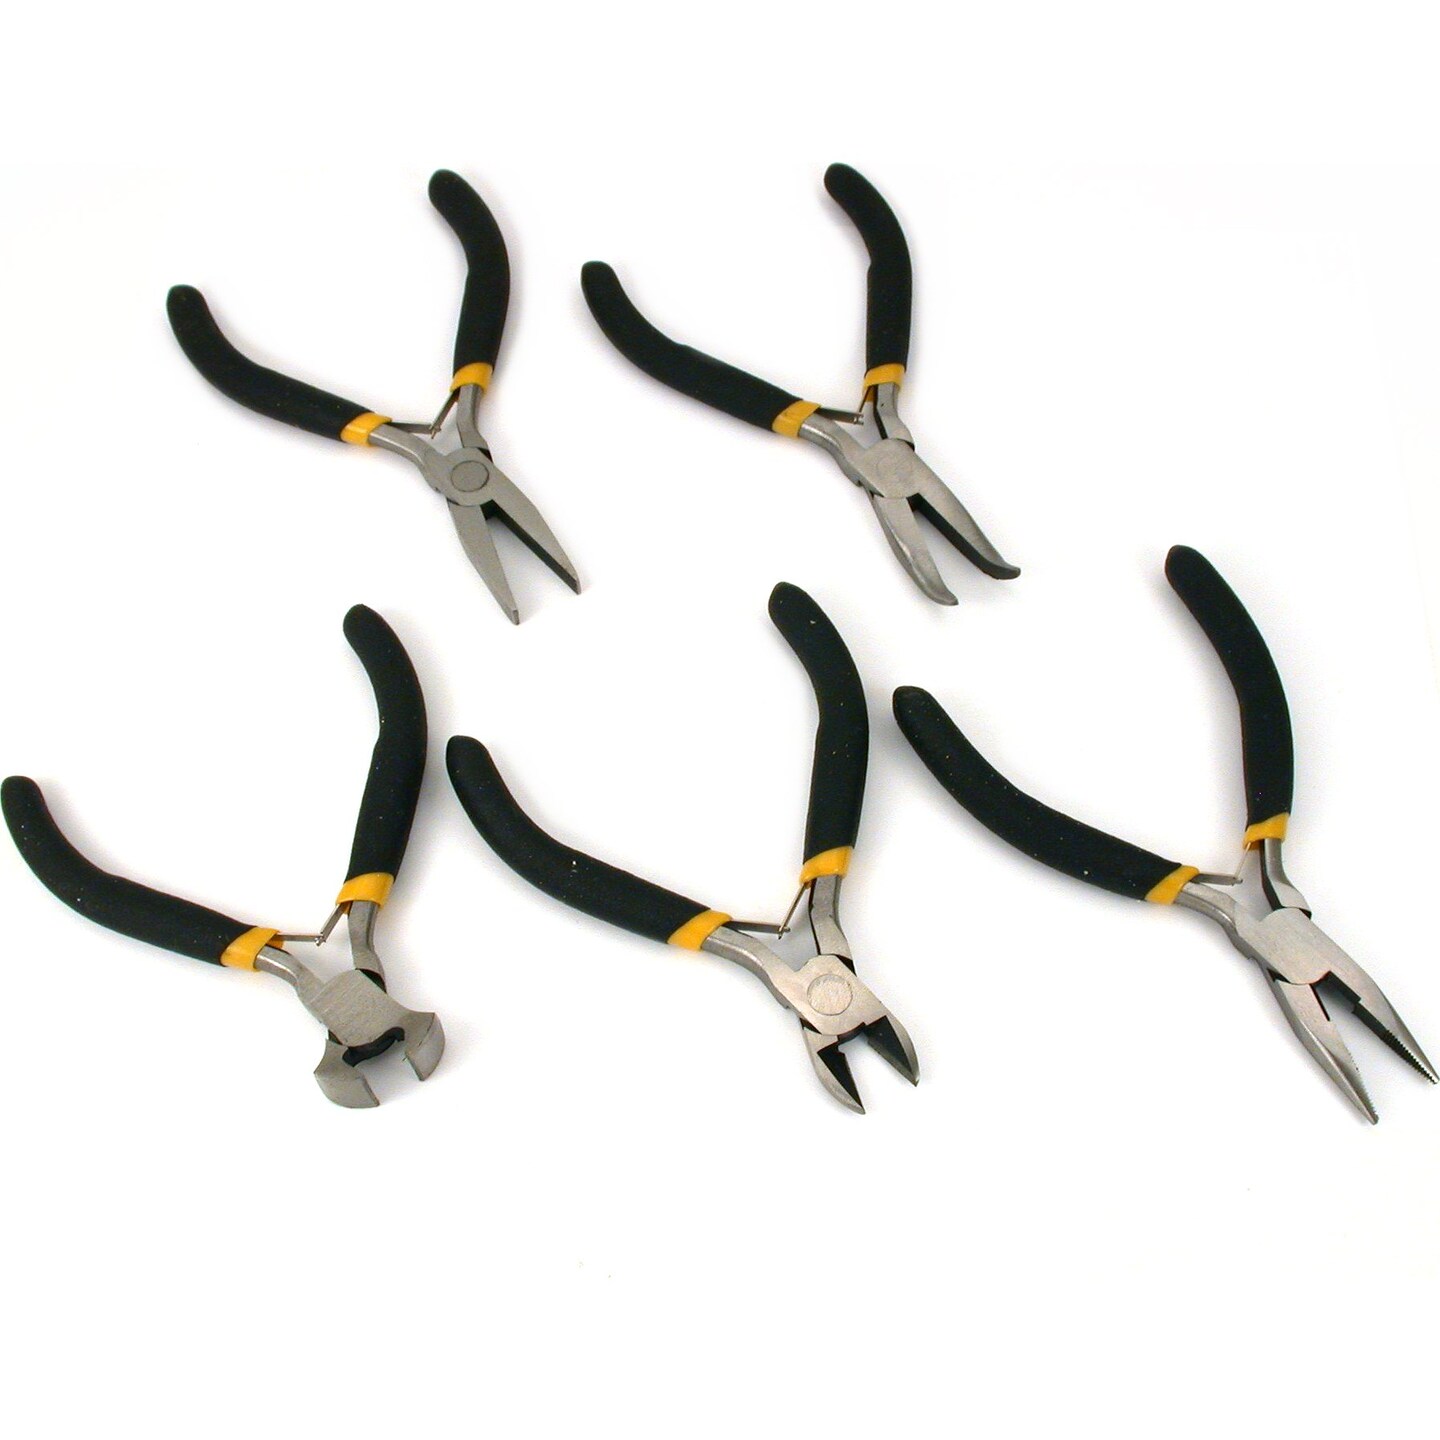 5pc Mini Pliers Set Jewelers Beading Wire Wrapping Tool